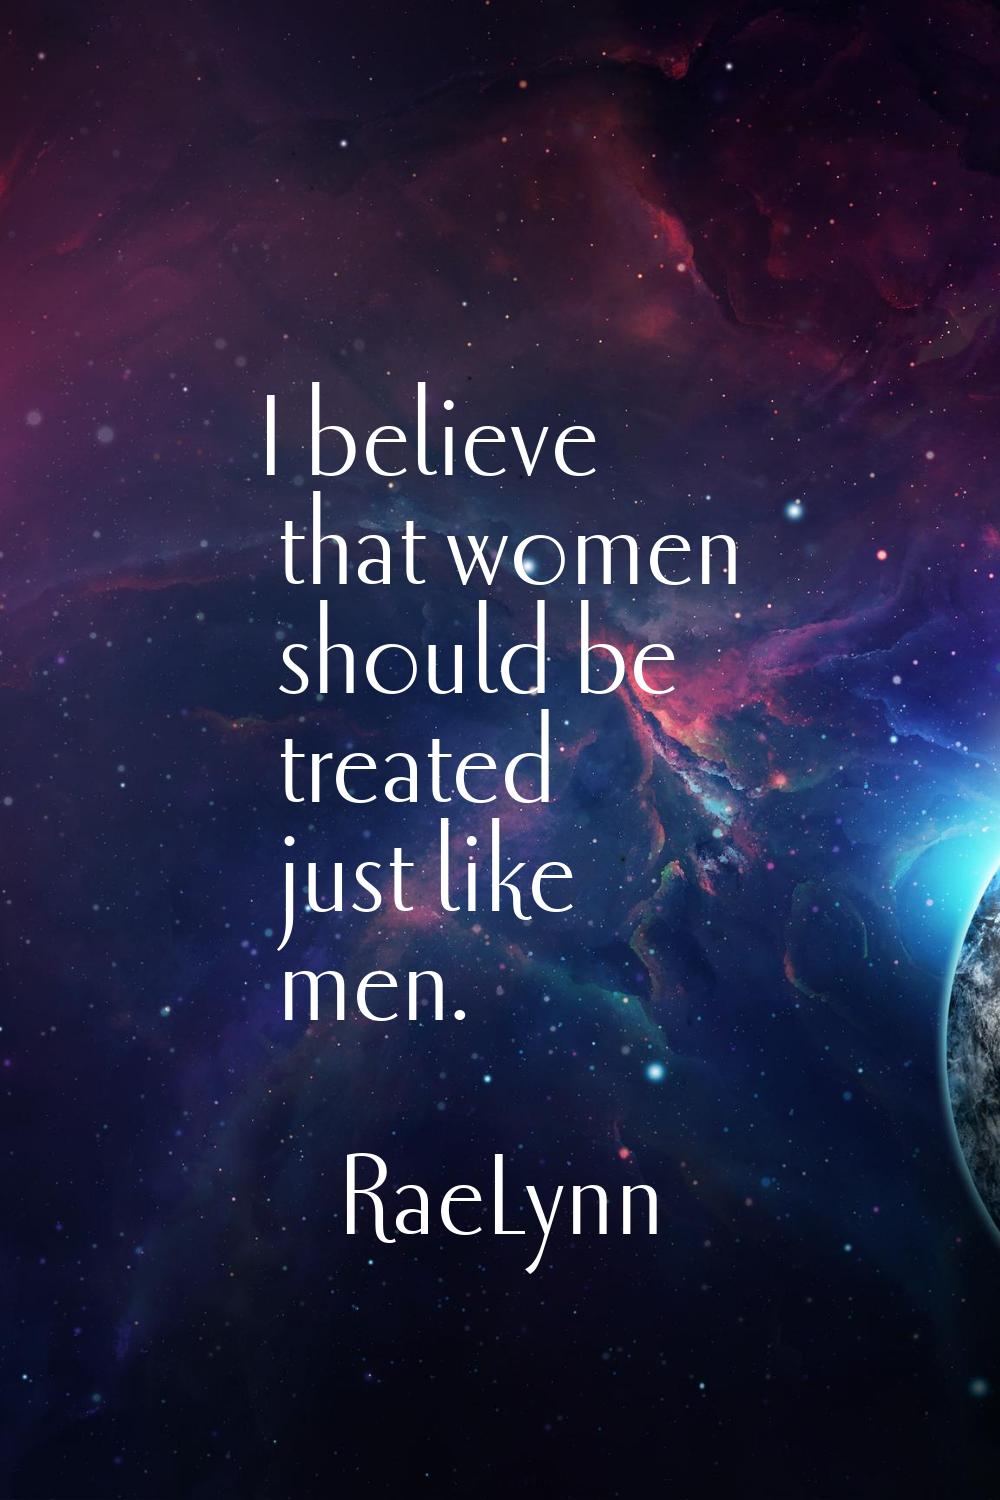 I believe that women should be treated just like men.